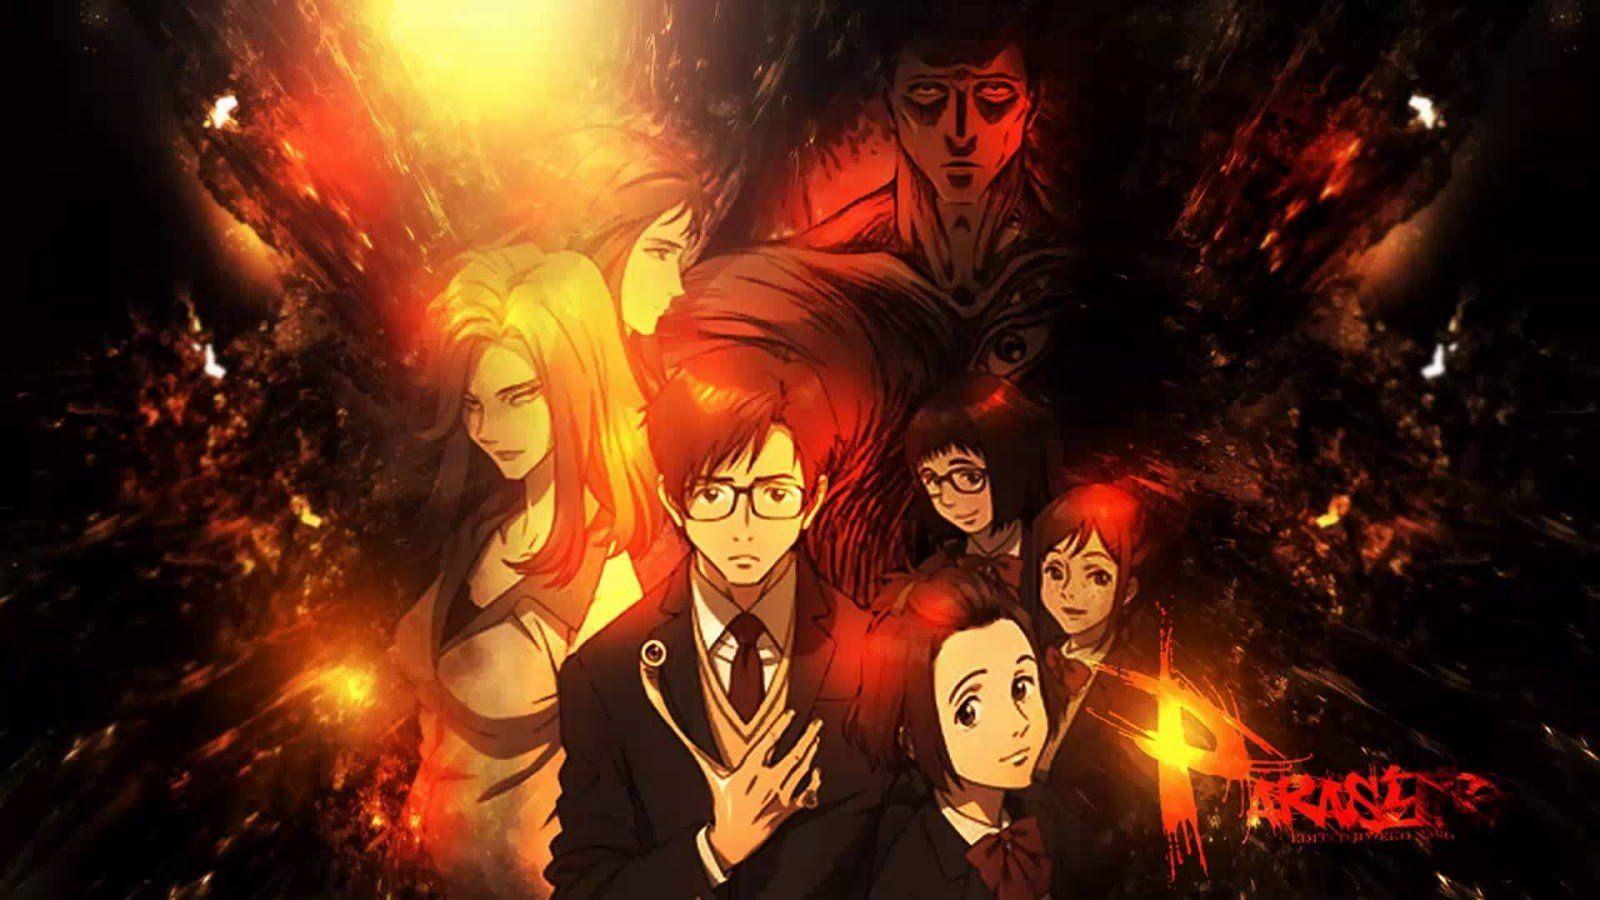 TV SHOW OF THE DAY Anime: The Maxim